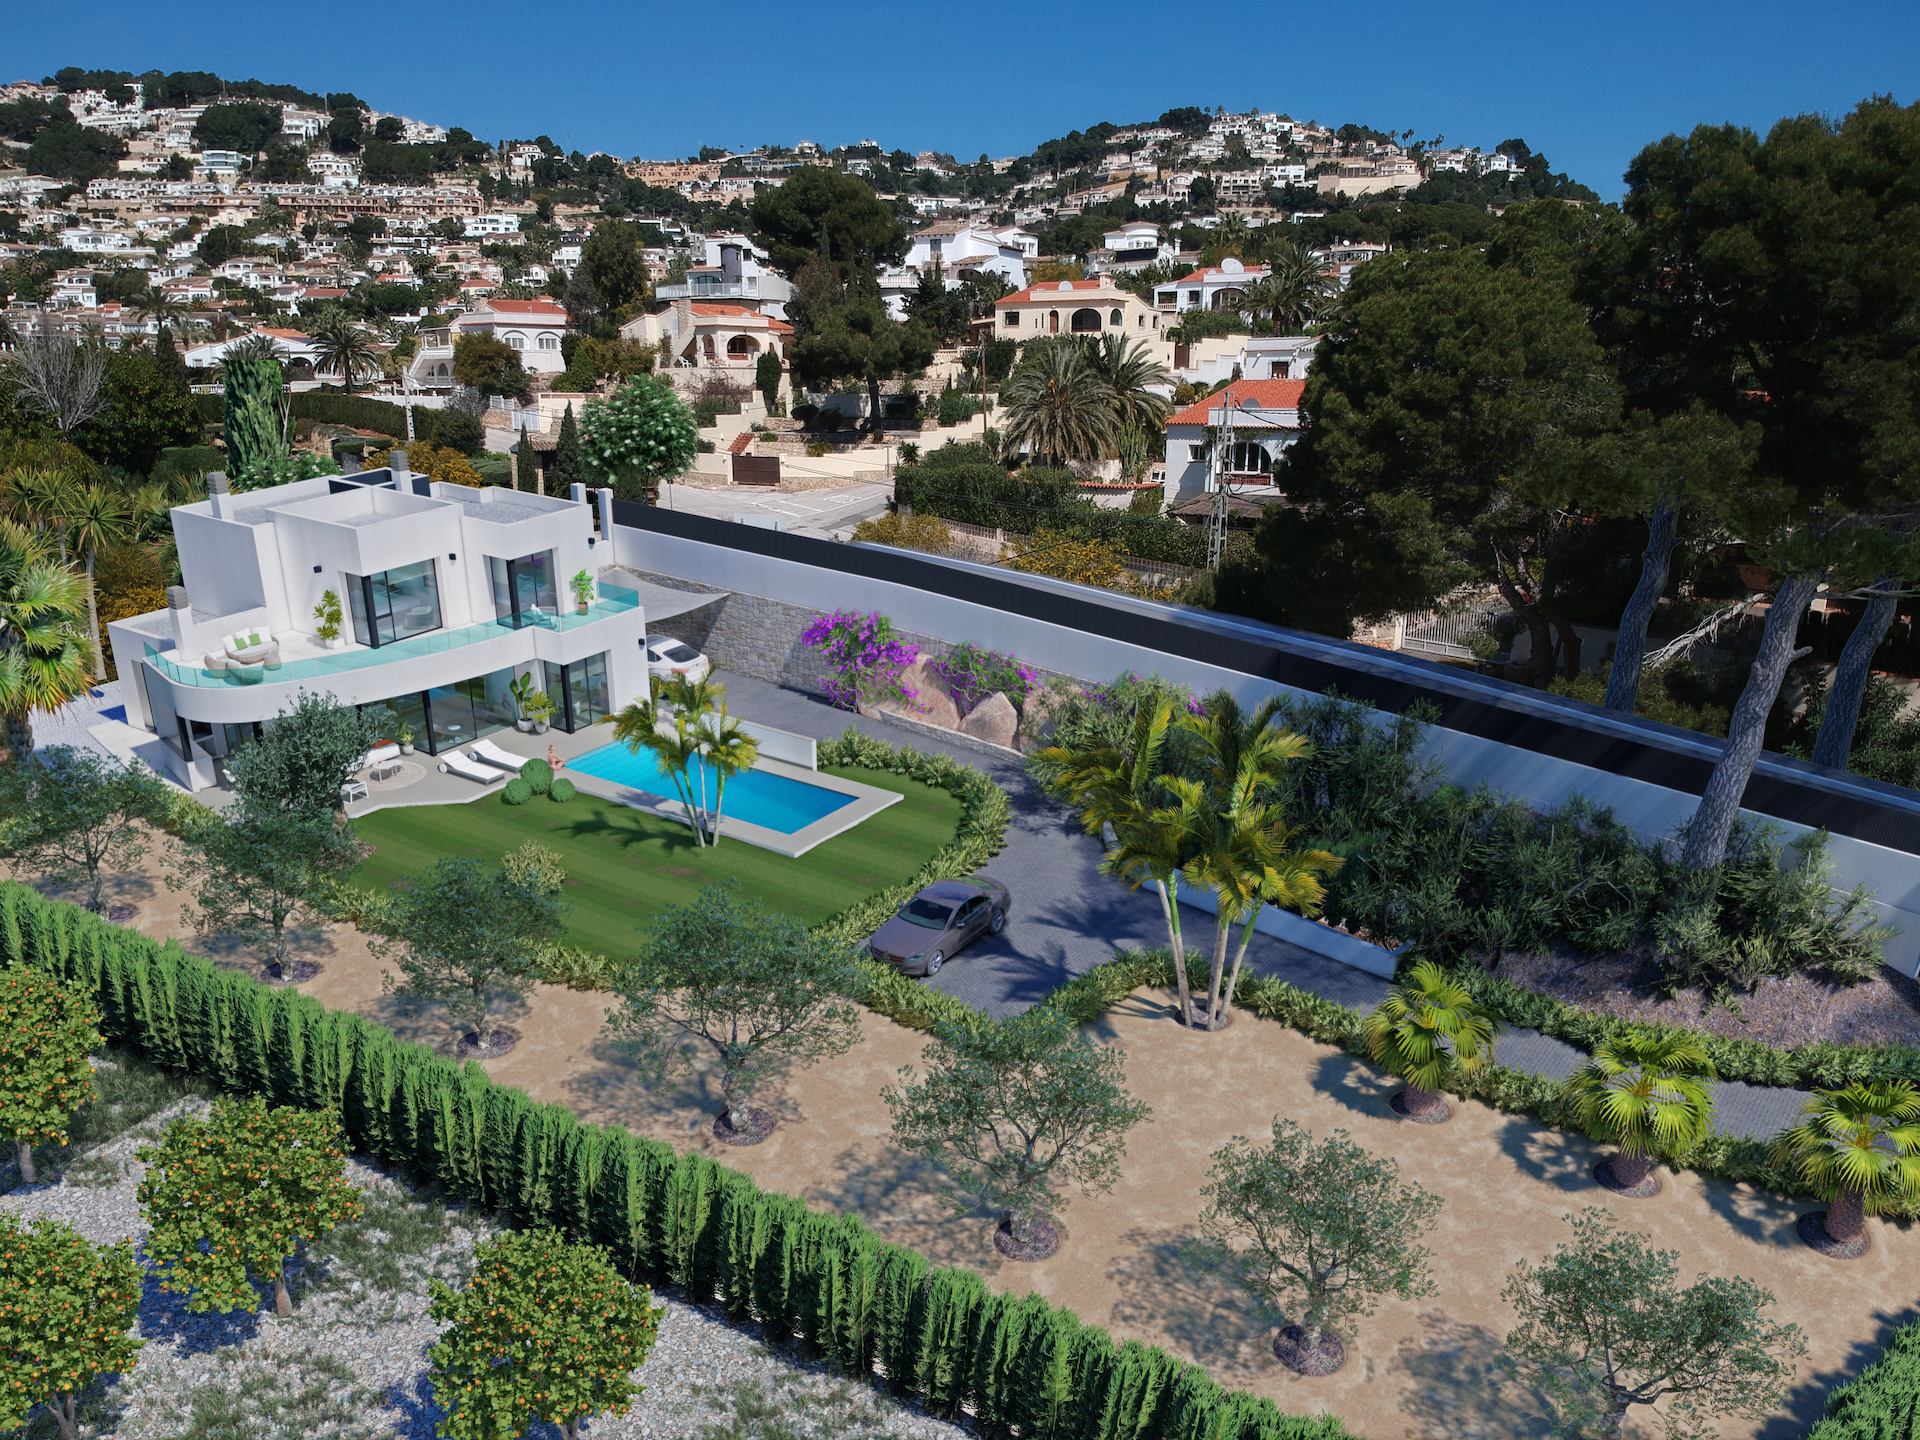 Unique Modern Villa for sale within walking distance to Moraira